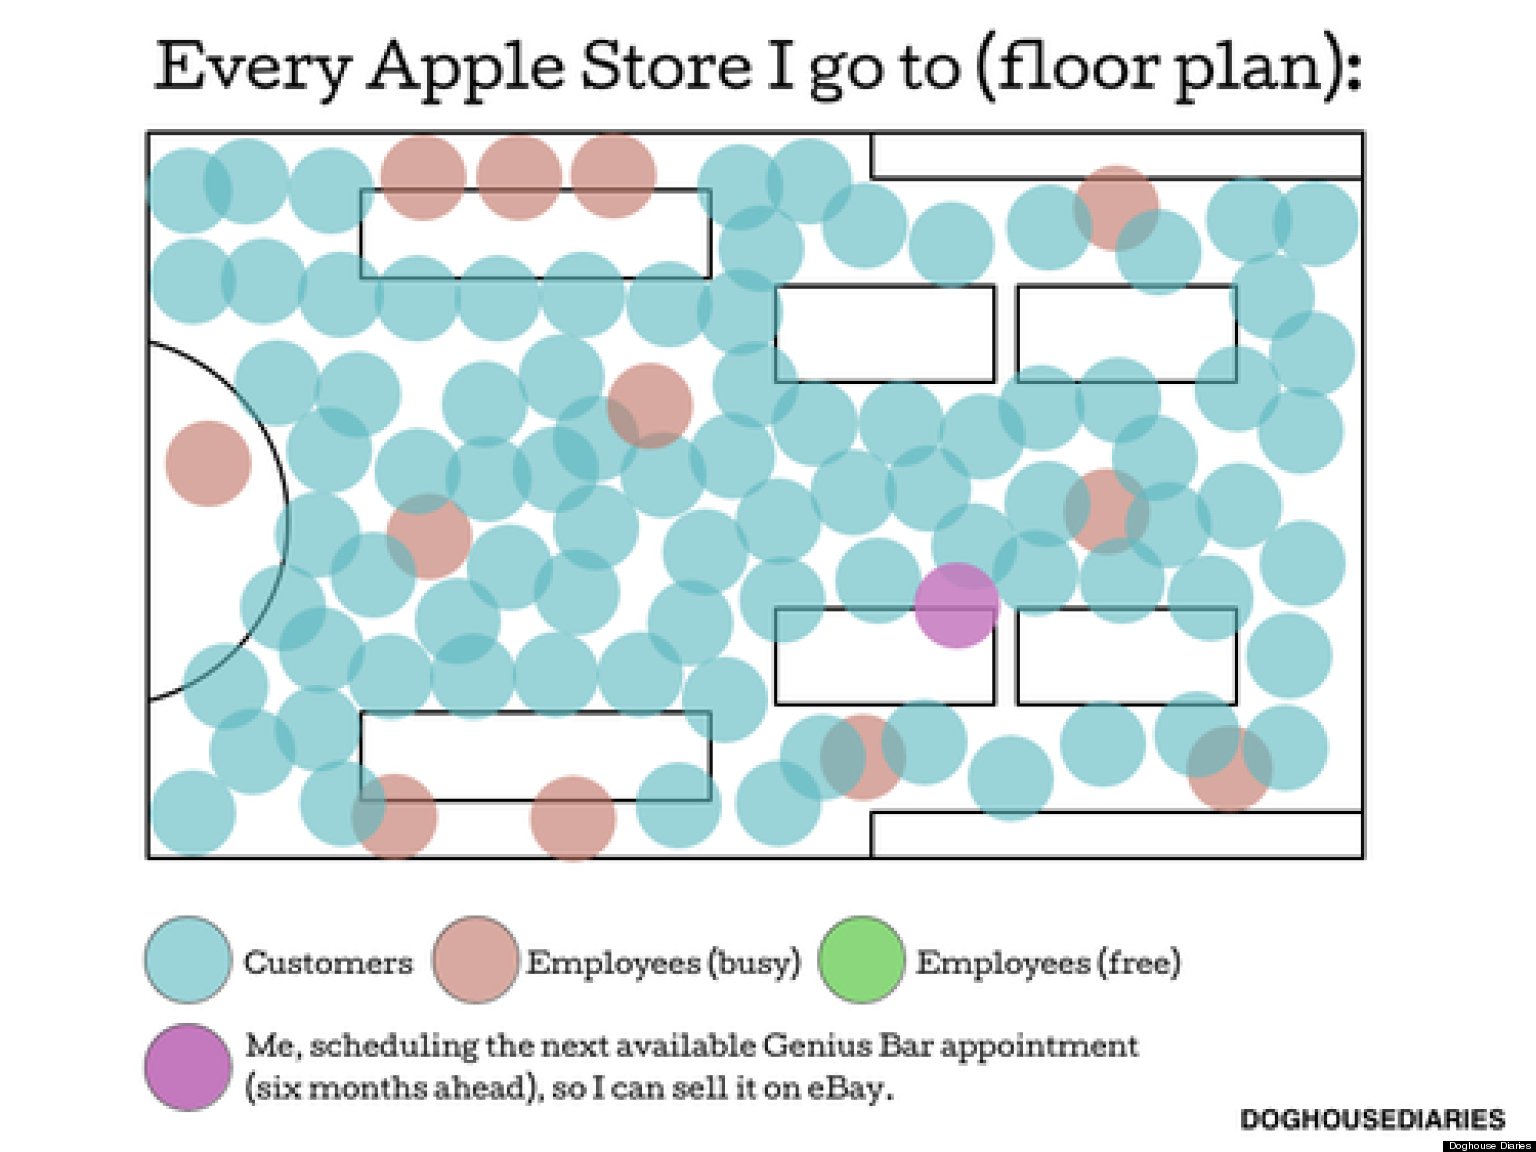 Doghouse Diaries Apple Store Floorplan (PICTURE) HuffPost